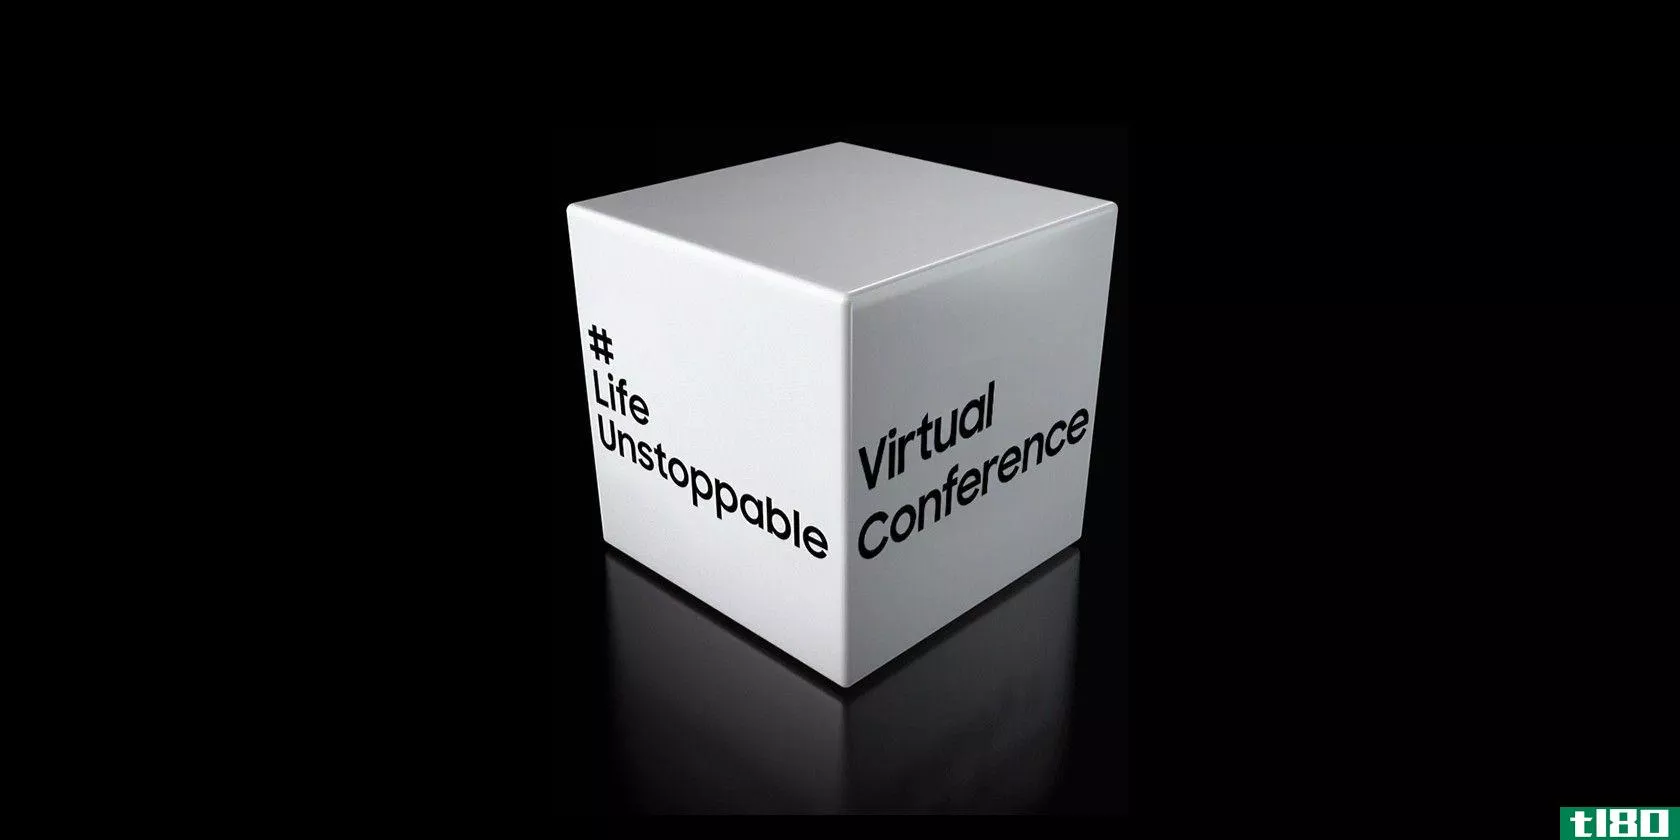 samsung life unstoppable virtual conference ifa2020